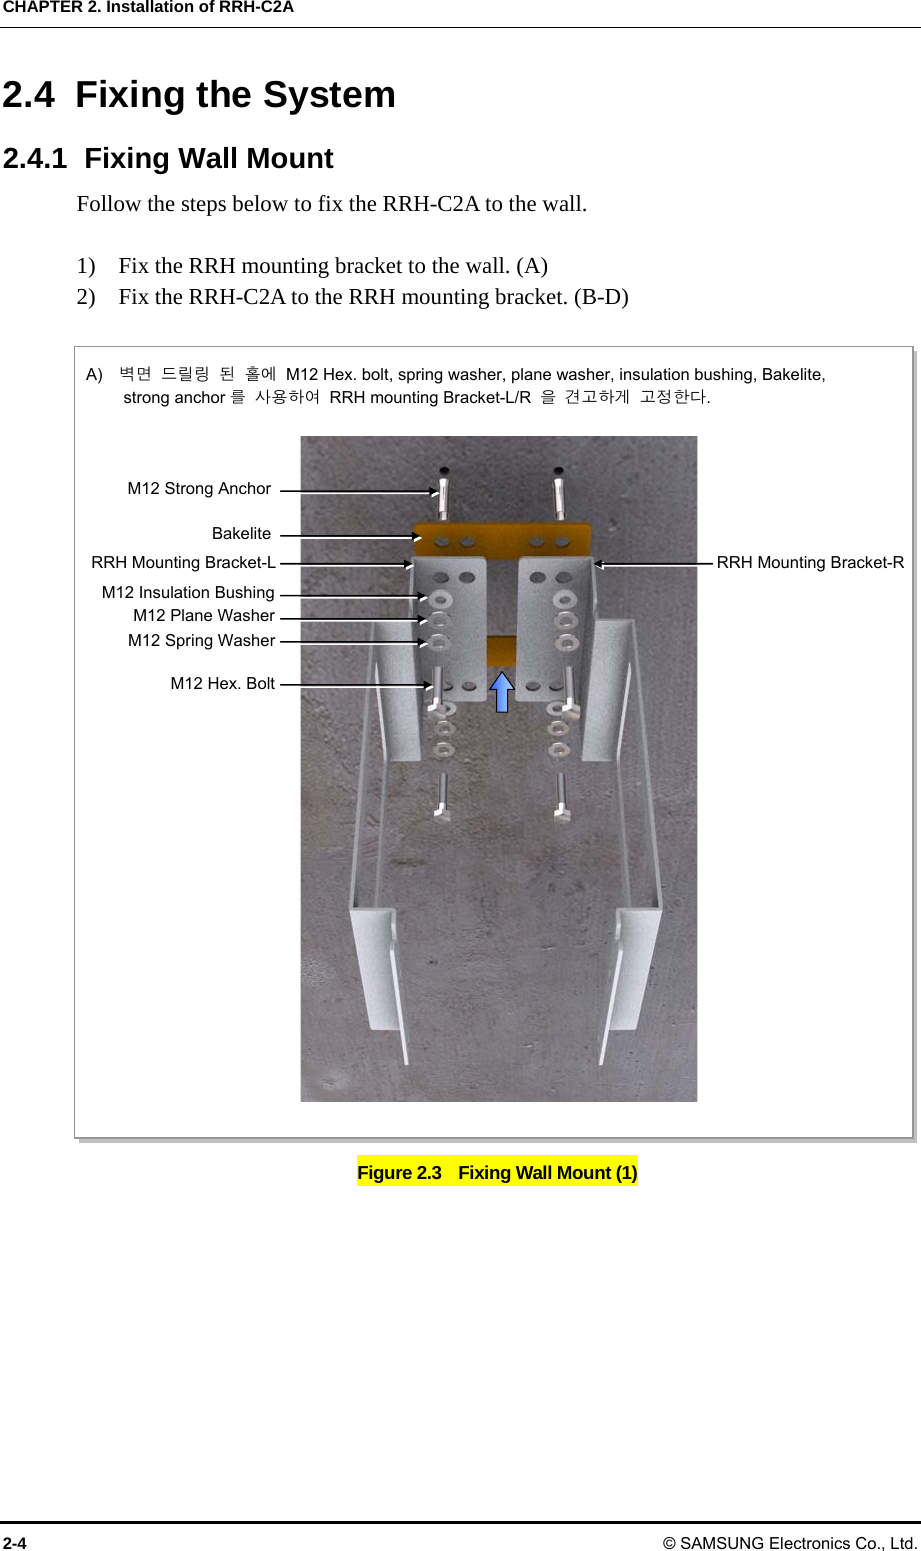 CHAPTER 2. Installation of RRH-C2A 2-4 © SAMSUNG Electronics Co., Ltd. 2.4 Fixing the System 2.4.1  Fixing Wall Mount Follow the steps below to fix the RRH-C2A to the wall.  1)    Fix the RRH mounting bracket to the wall. (A) 2)    Fix the RRH-C2A to the RRH mounting bracket. (B-D)  Figure 2.3    Fixing Wall Mount (1) A)  벽면 드릴링 된 홀에  M12 Hex. bolt, spring washer, plane washer, insulation bushing, Bakelite,          strong anchor 를 사용하여  RRH mounting Bracket-L/R  을 견고하게 고정한다. M12 Hex. BoltM12 Spring WasherM12 Plane WasherM12 Strong AnchorRRH Mounting Bracket-LM12 Insulation BushingBakeliteRRH Mounting Bracket-R